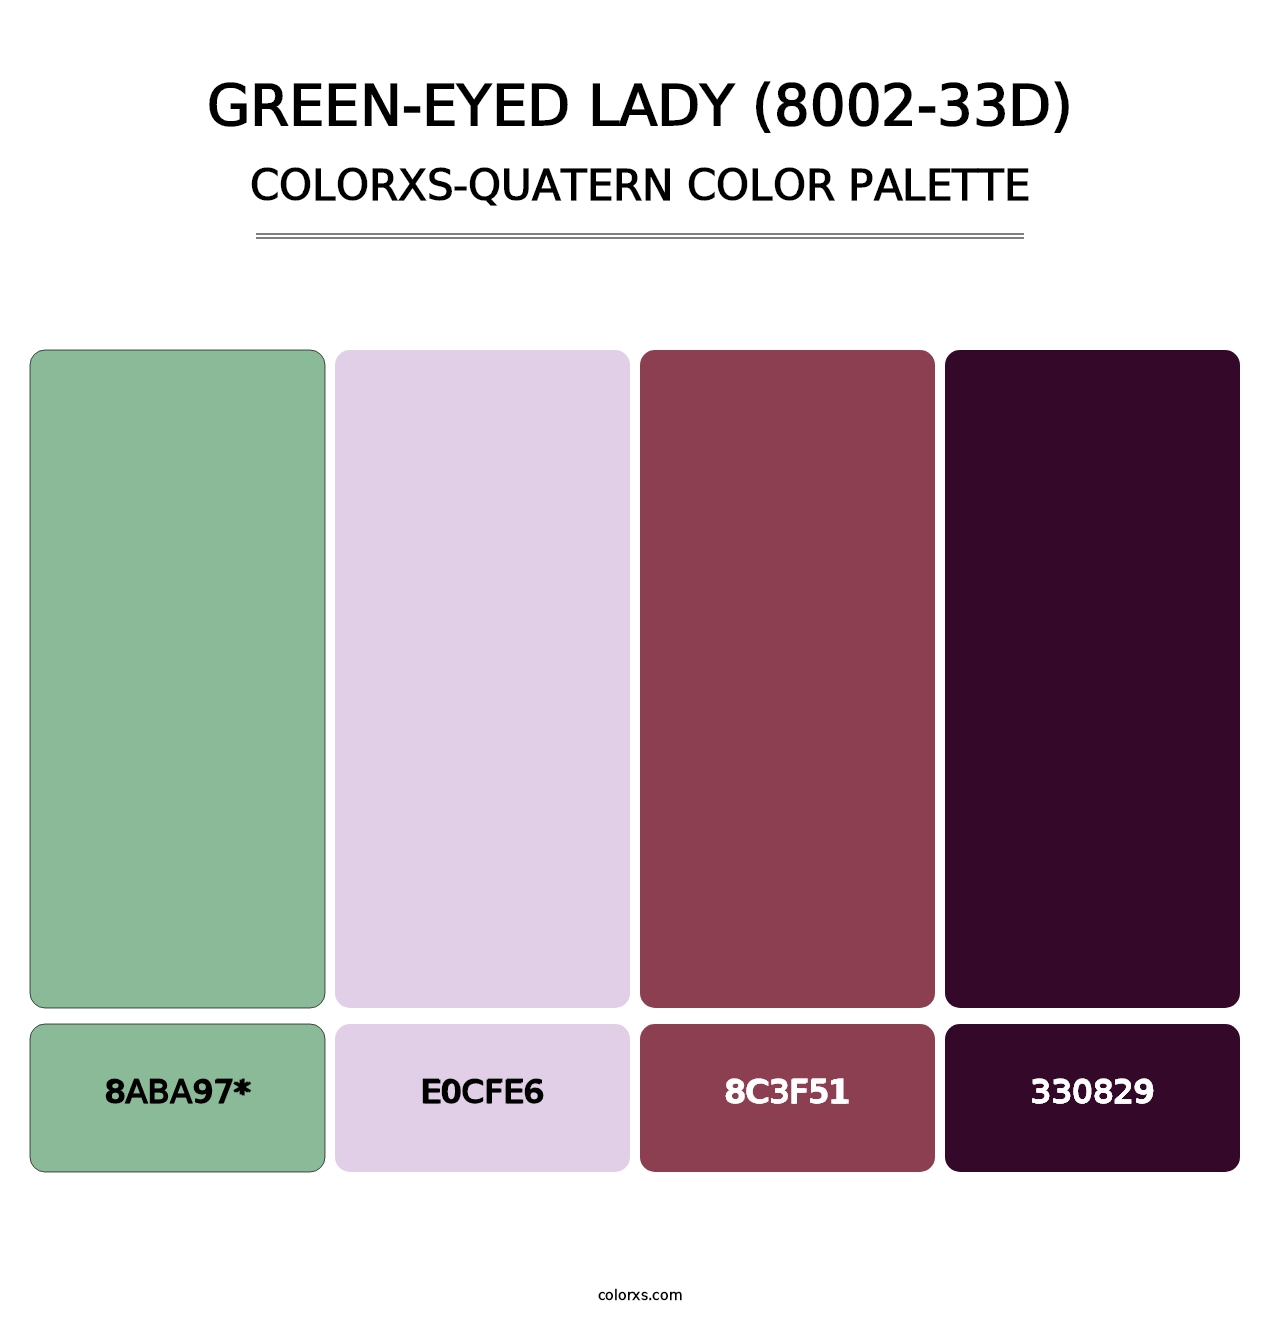 Green-Eyed Lady (8002-33D) - Colorxs Quatern Palette